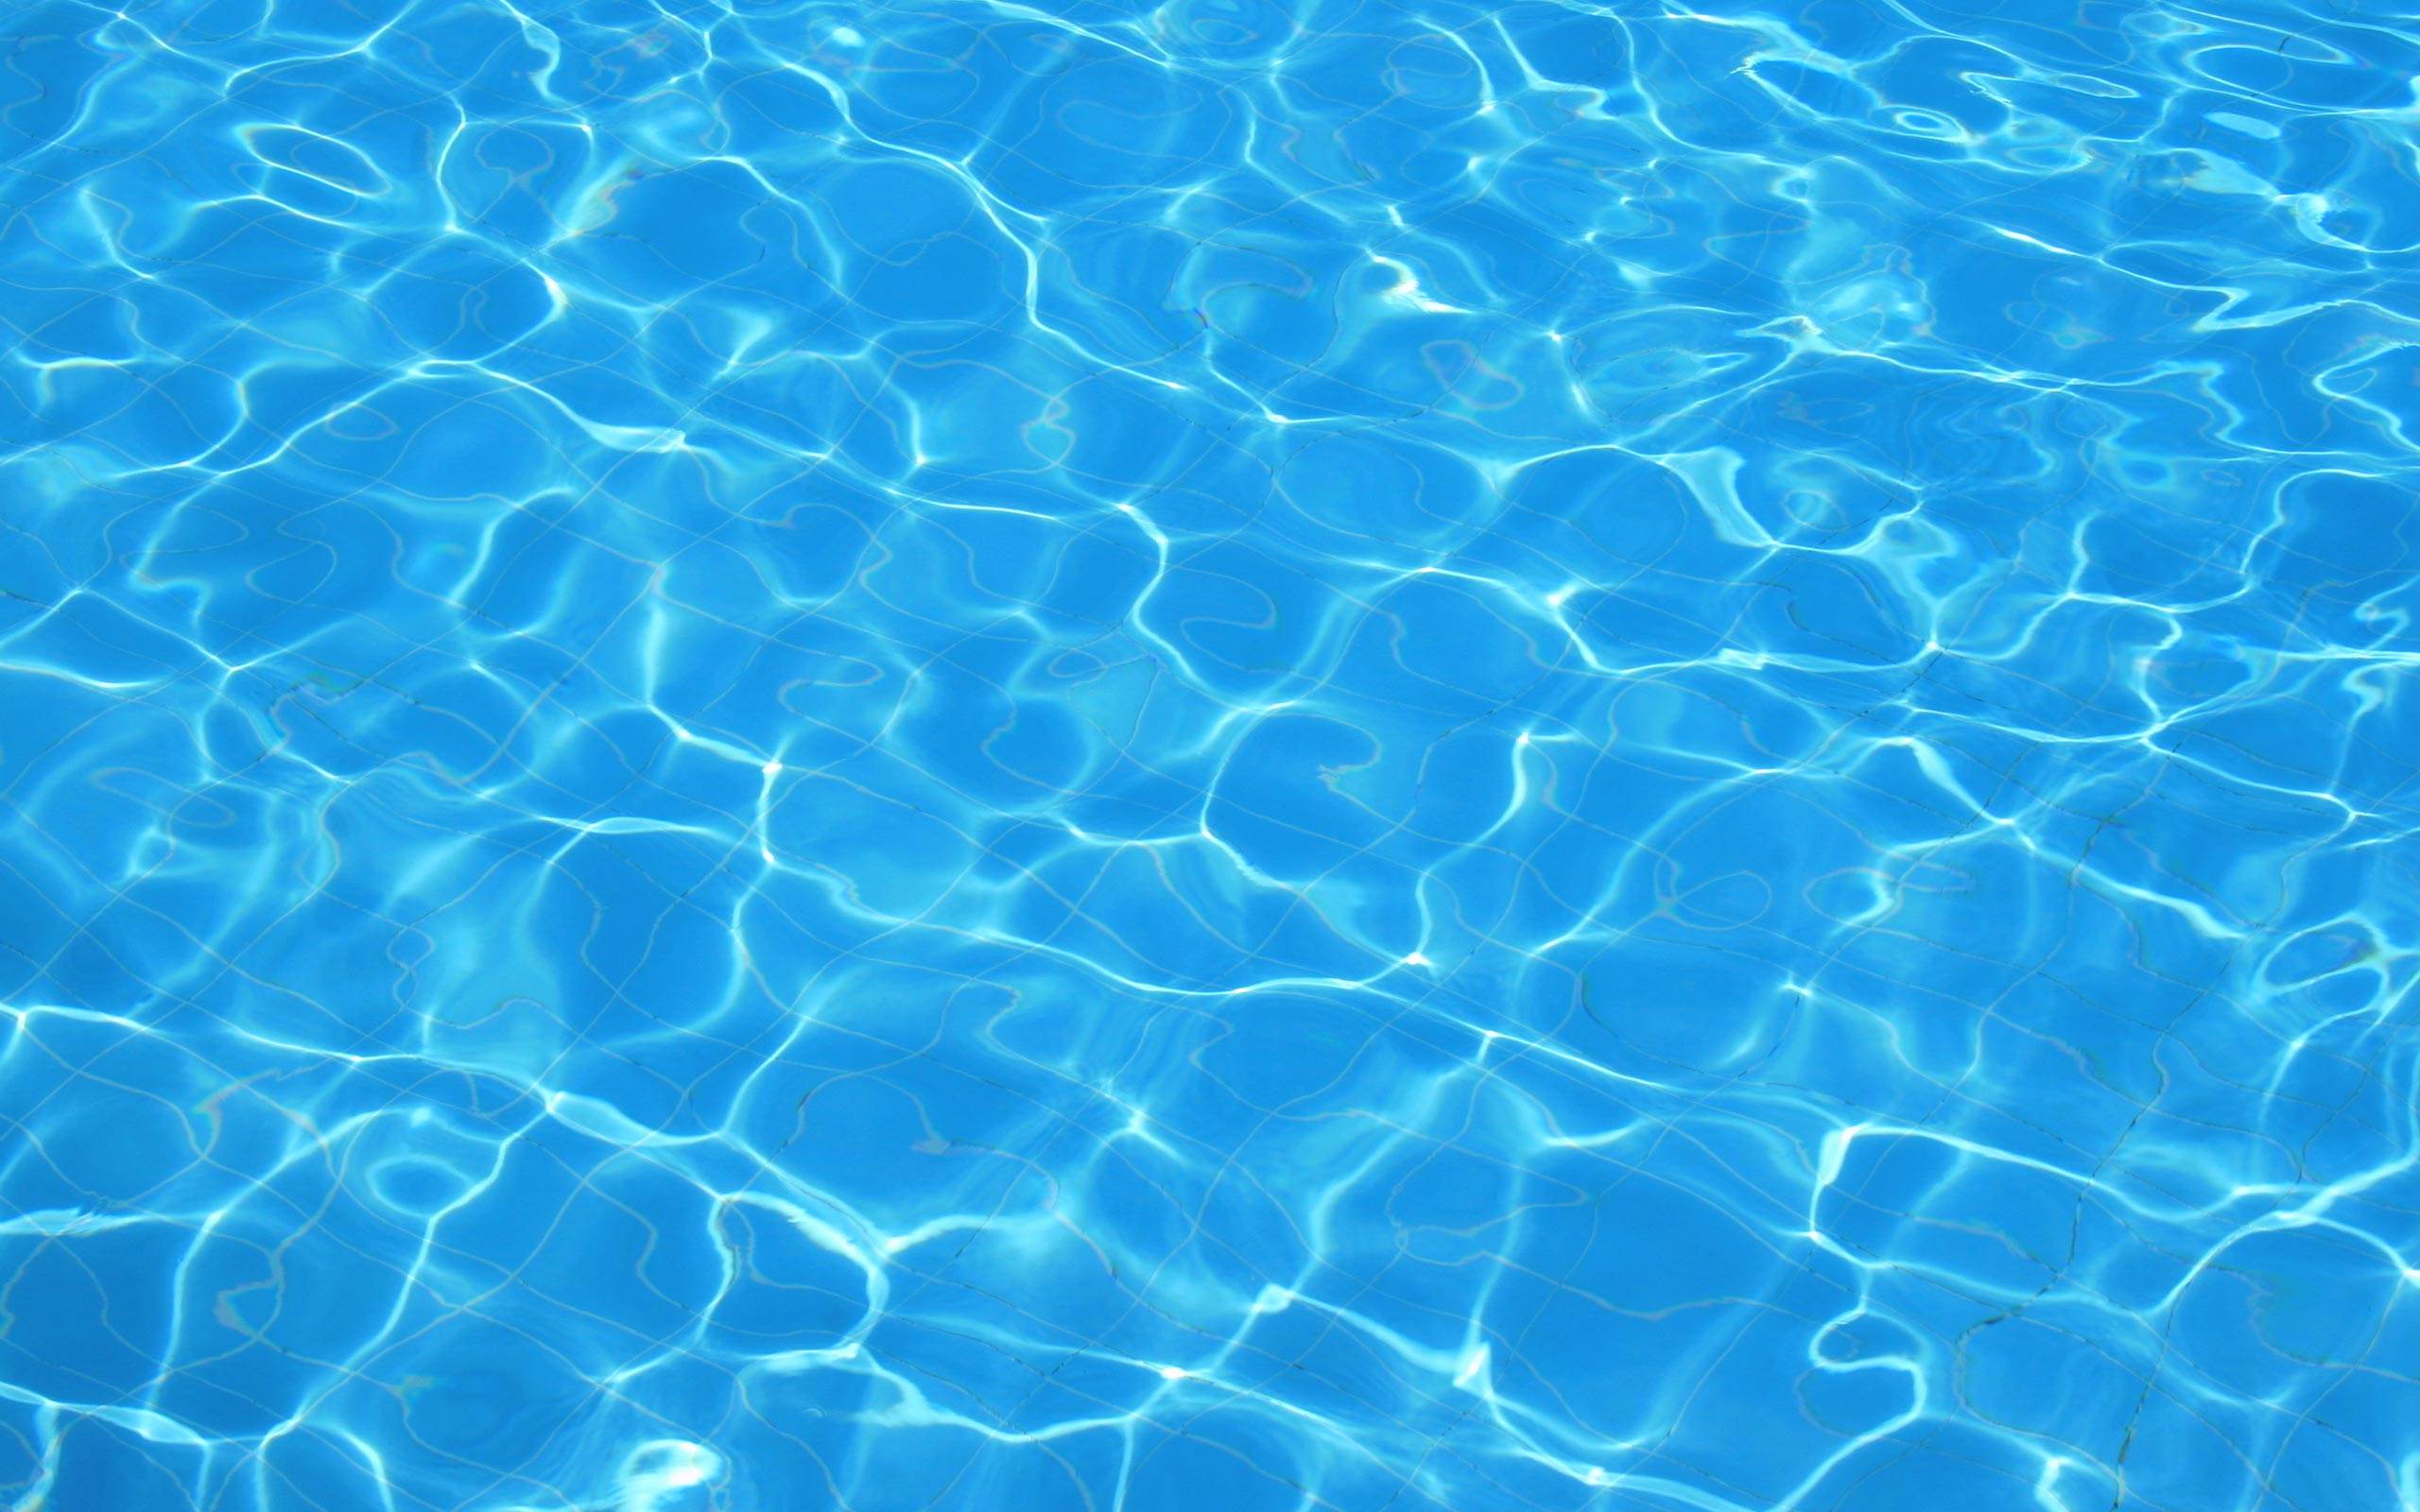 The surface of a swimming pool with light reflecting off the water - Aqua, swimming pool